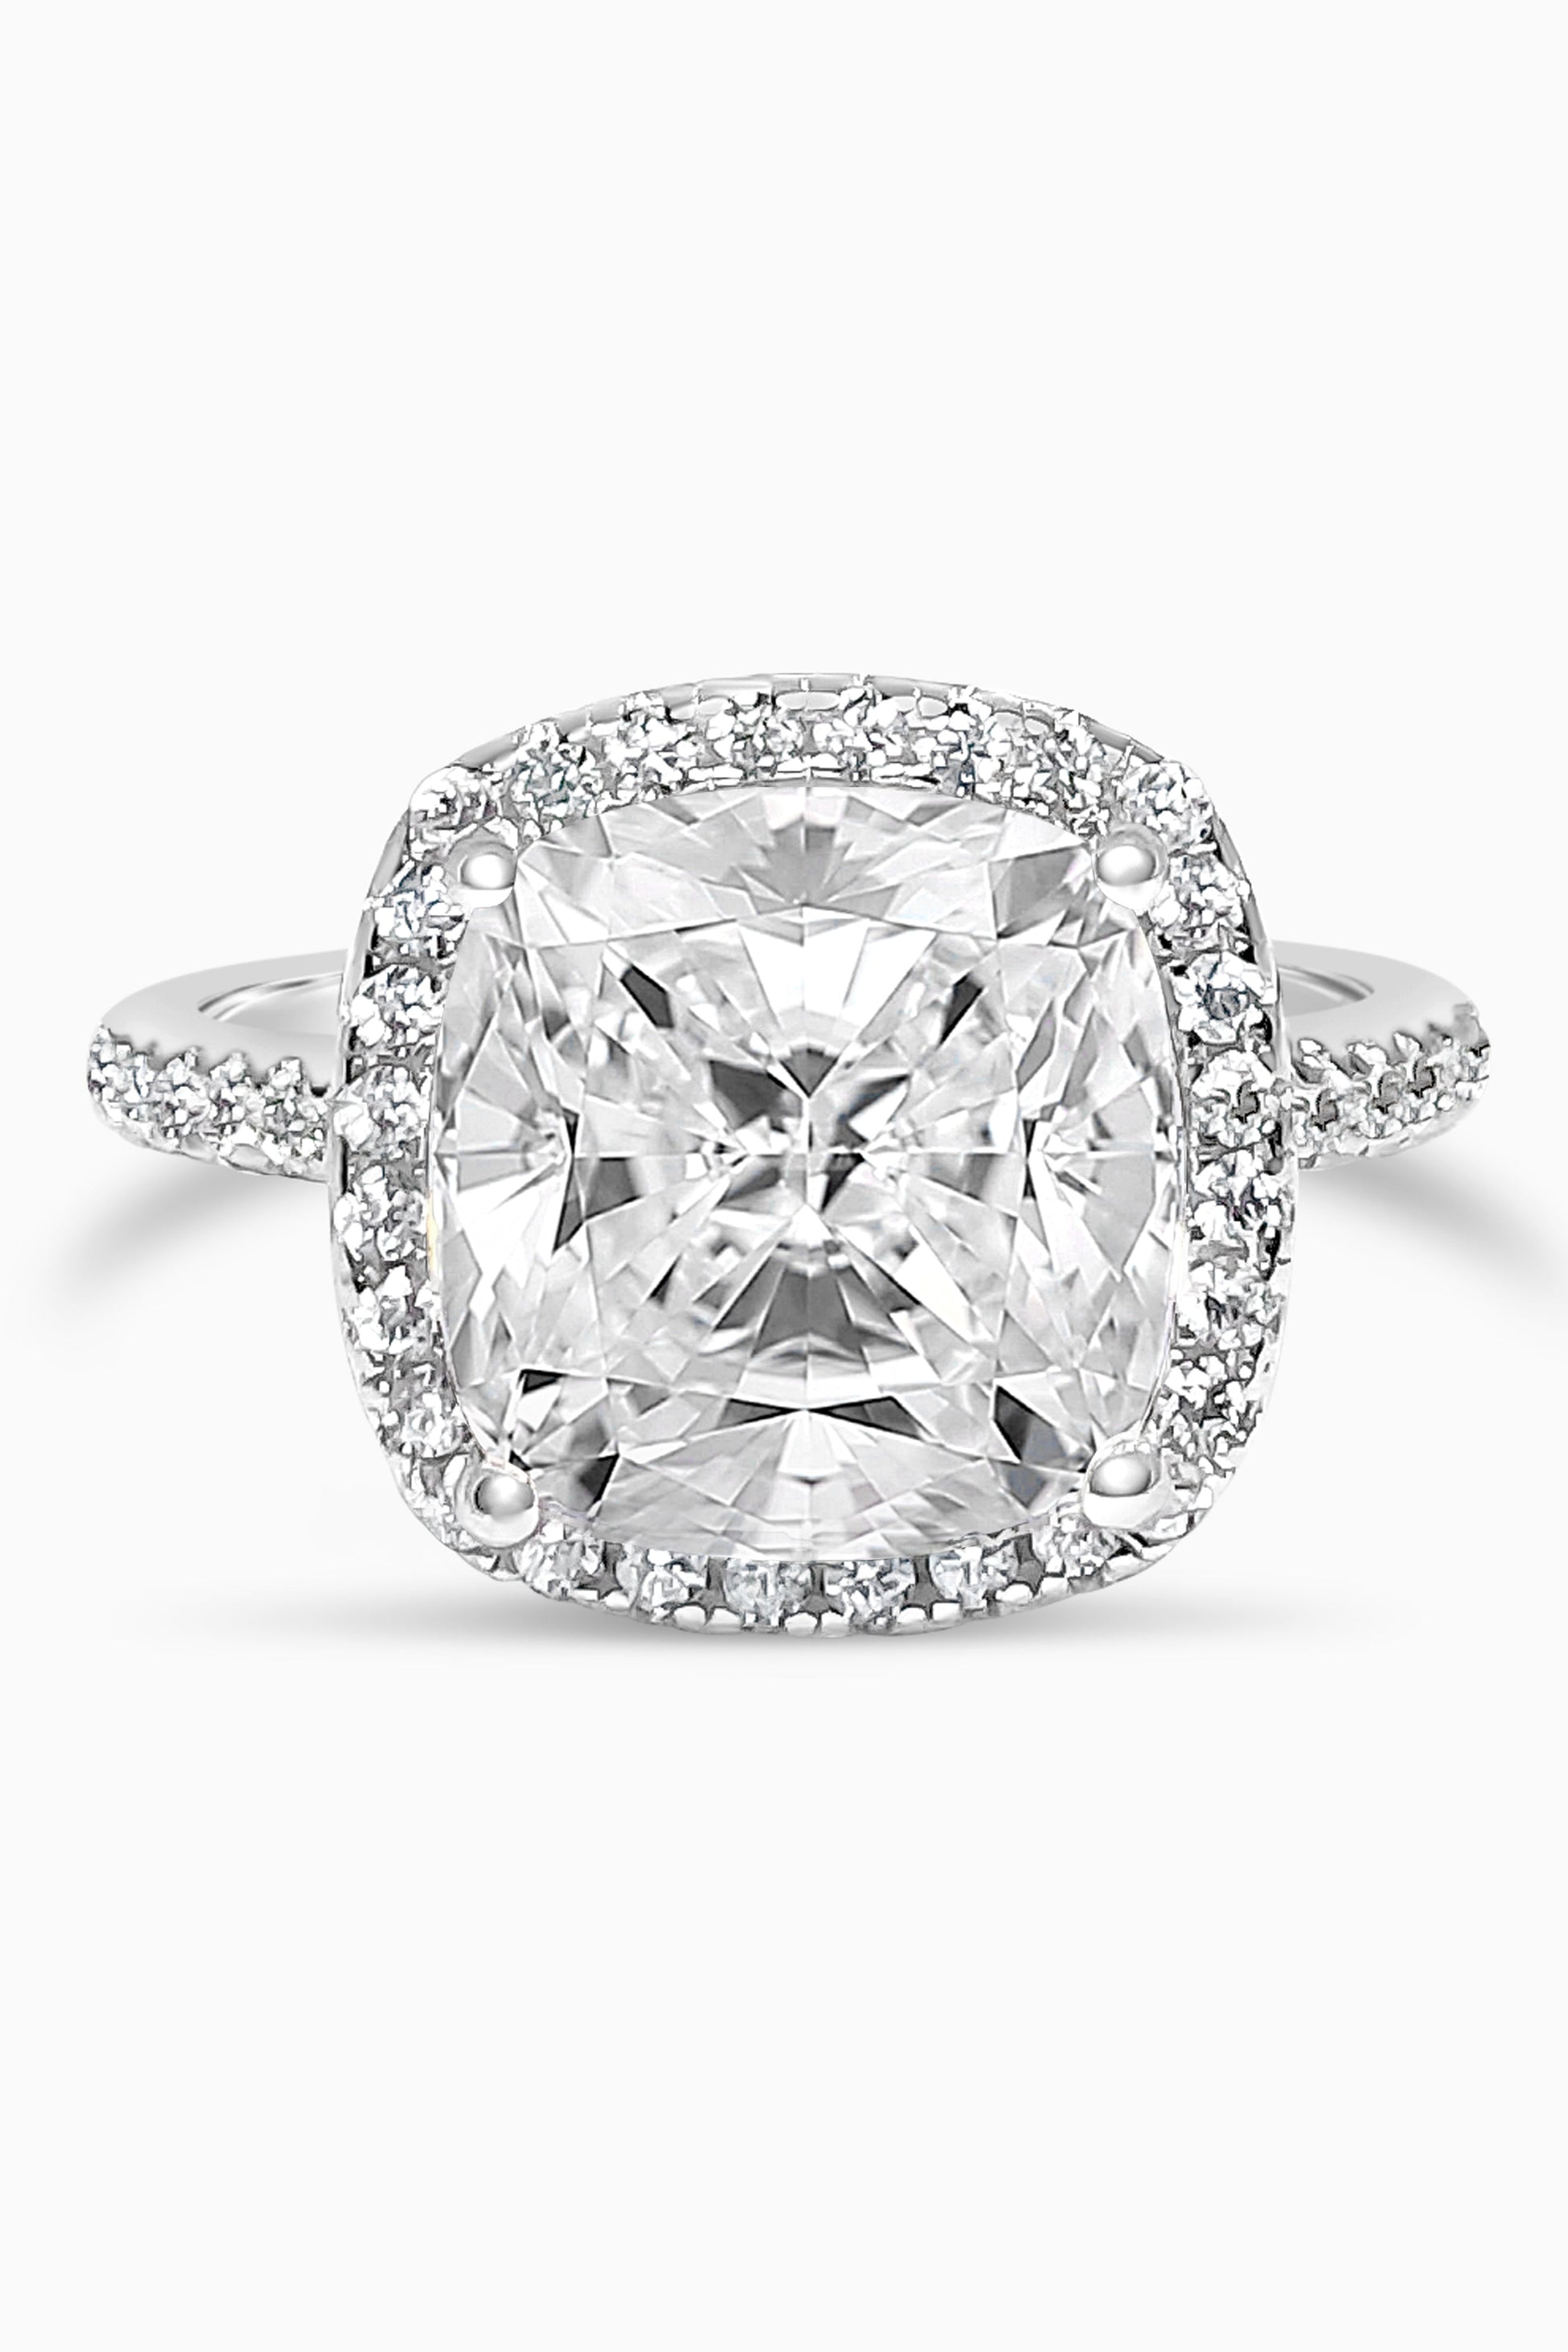 White Gold Large Cushion Cut with Surrounding Halo and Pavé stones all along the prongs, crown, and band